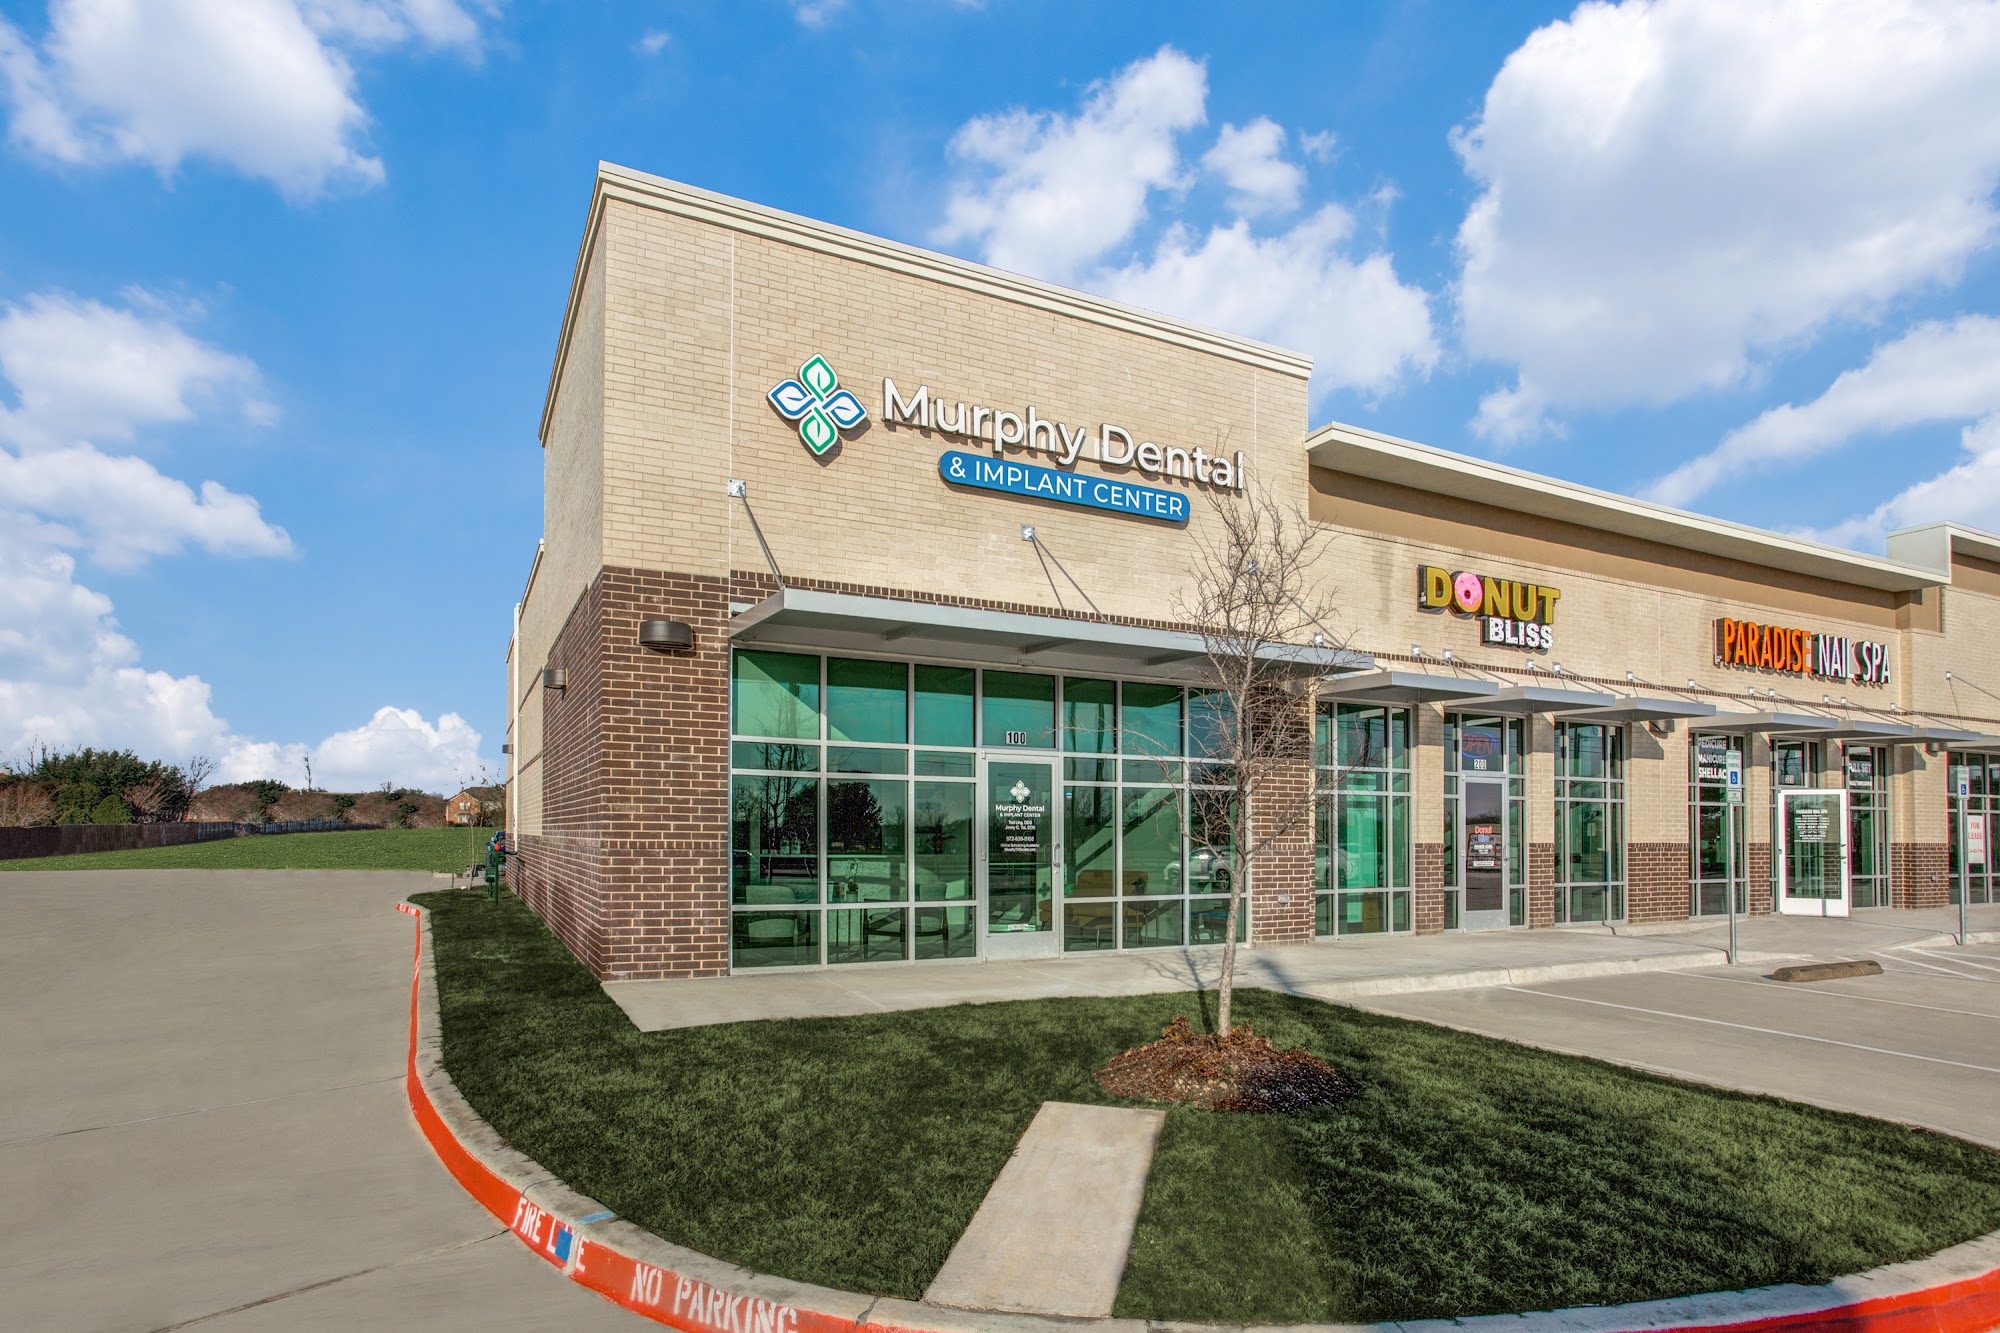 Murphy Dental and Implant Center